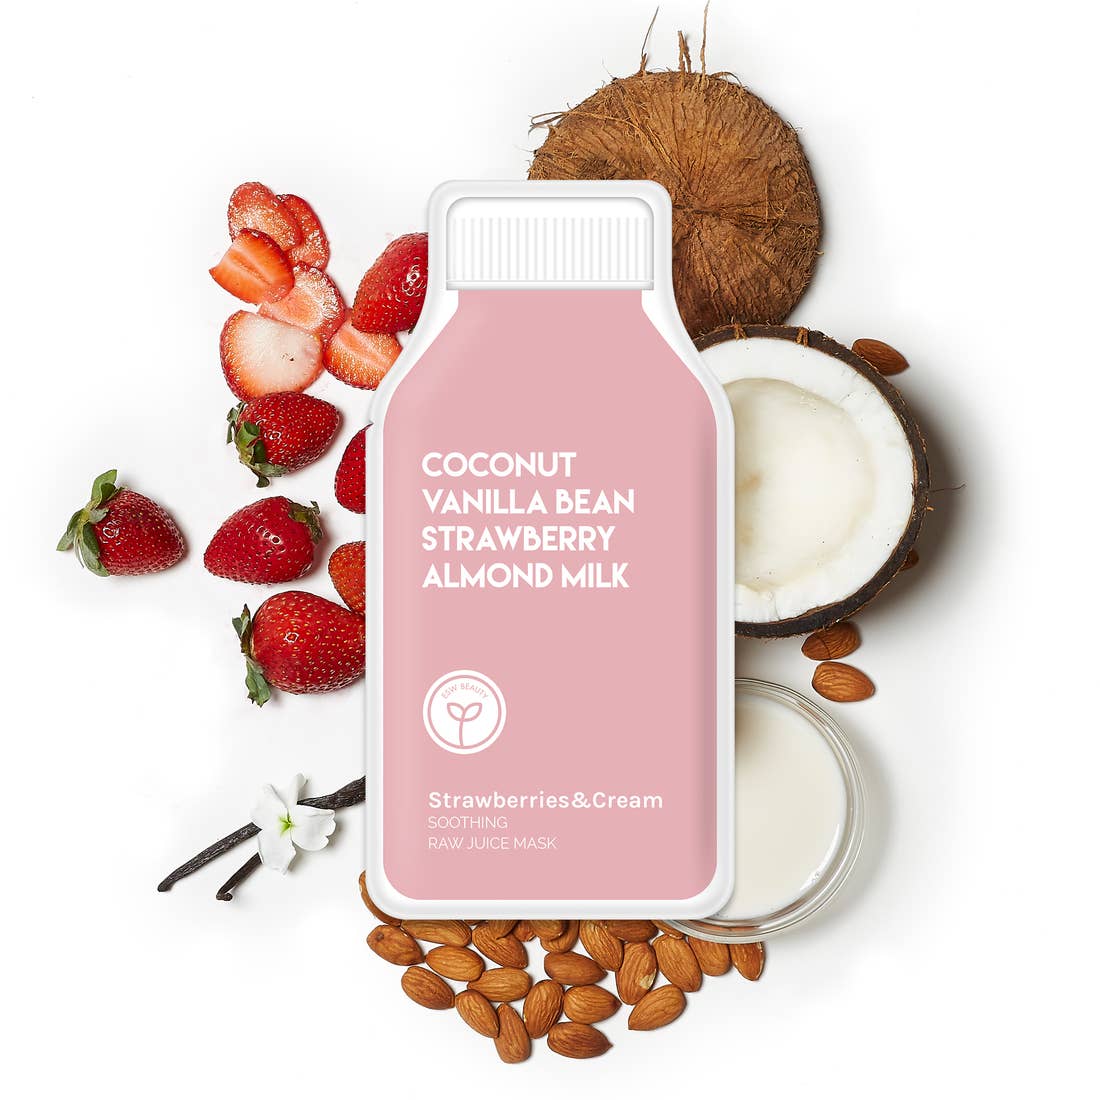 Mother Nature's Best Market ESW Beauty Strawberries and Cream Soothing Raw Juice Mask Cruelty-Free, Organic, Reusable/Recyclable, Vegan